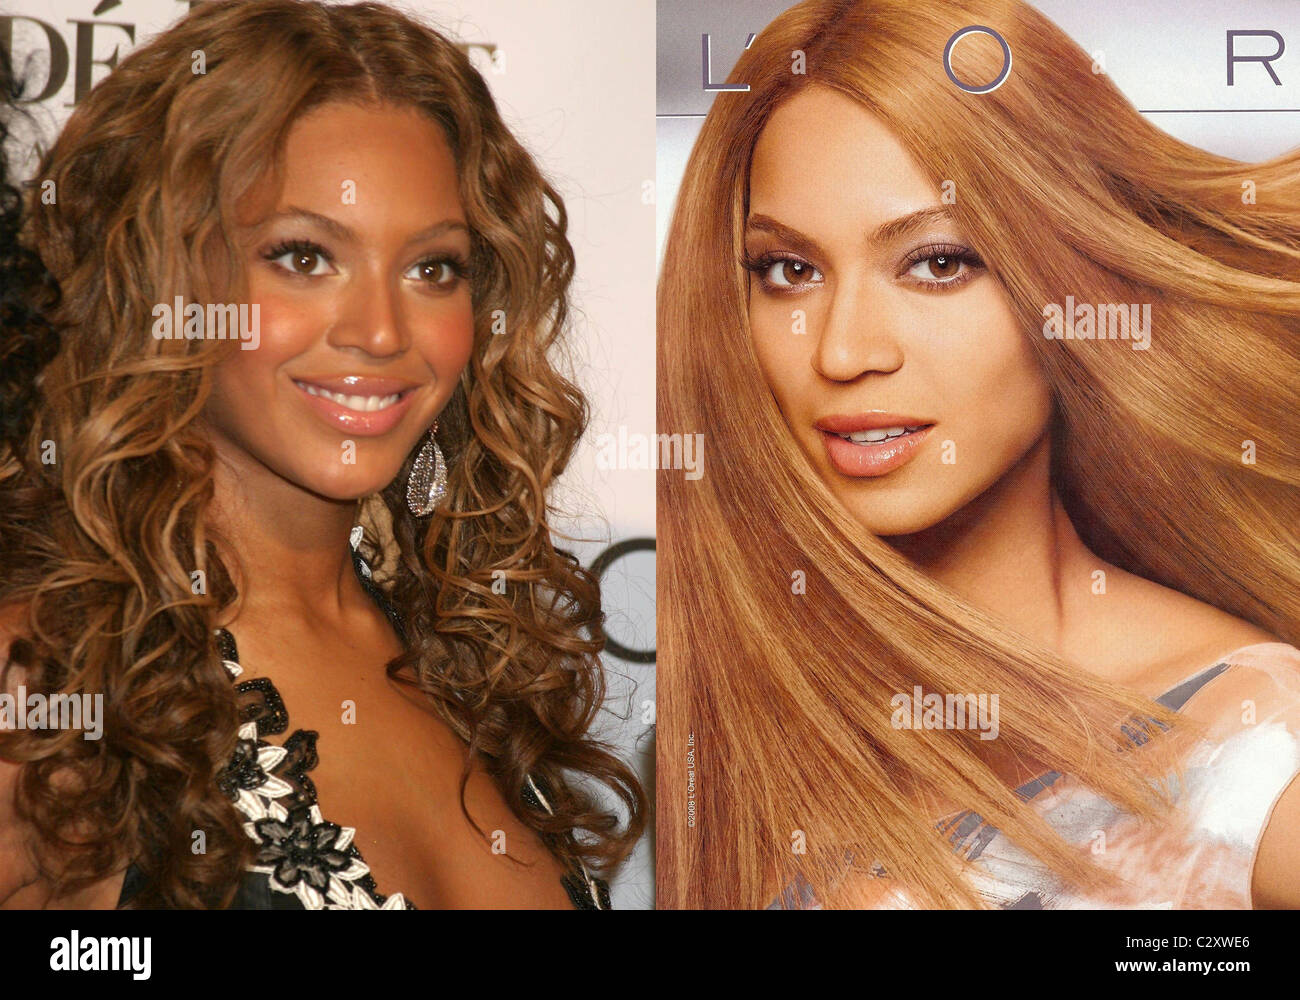 * KNOWLES' L'OREAL AD SPARKS ROW OVER SKIN COLOUR R&B superstar BEYONCE KNOWLES' skin was reportedly digitally bleached in an Stock Photo